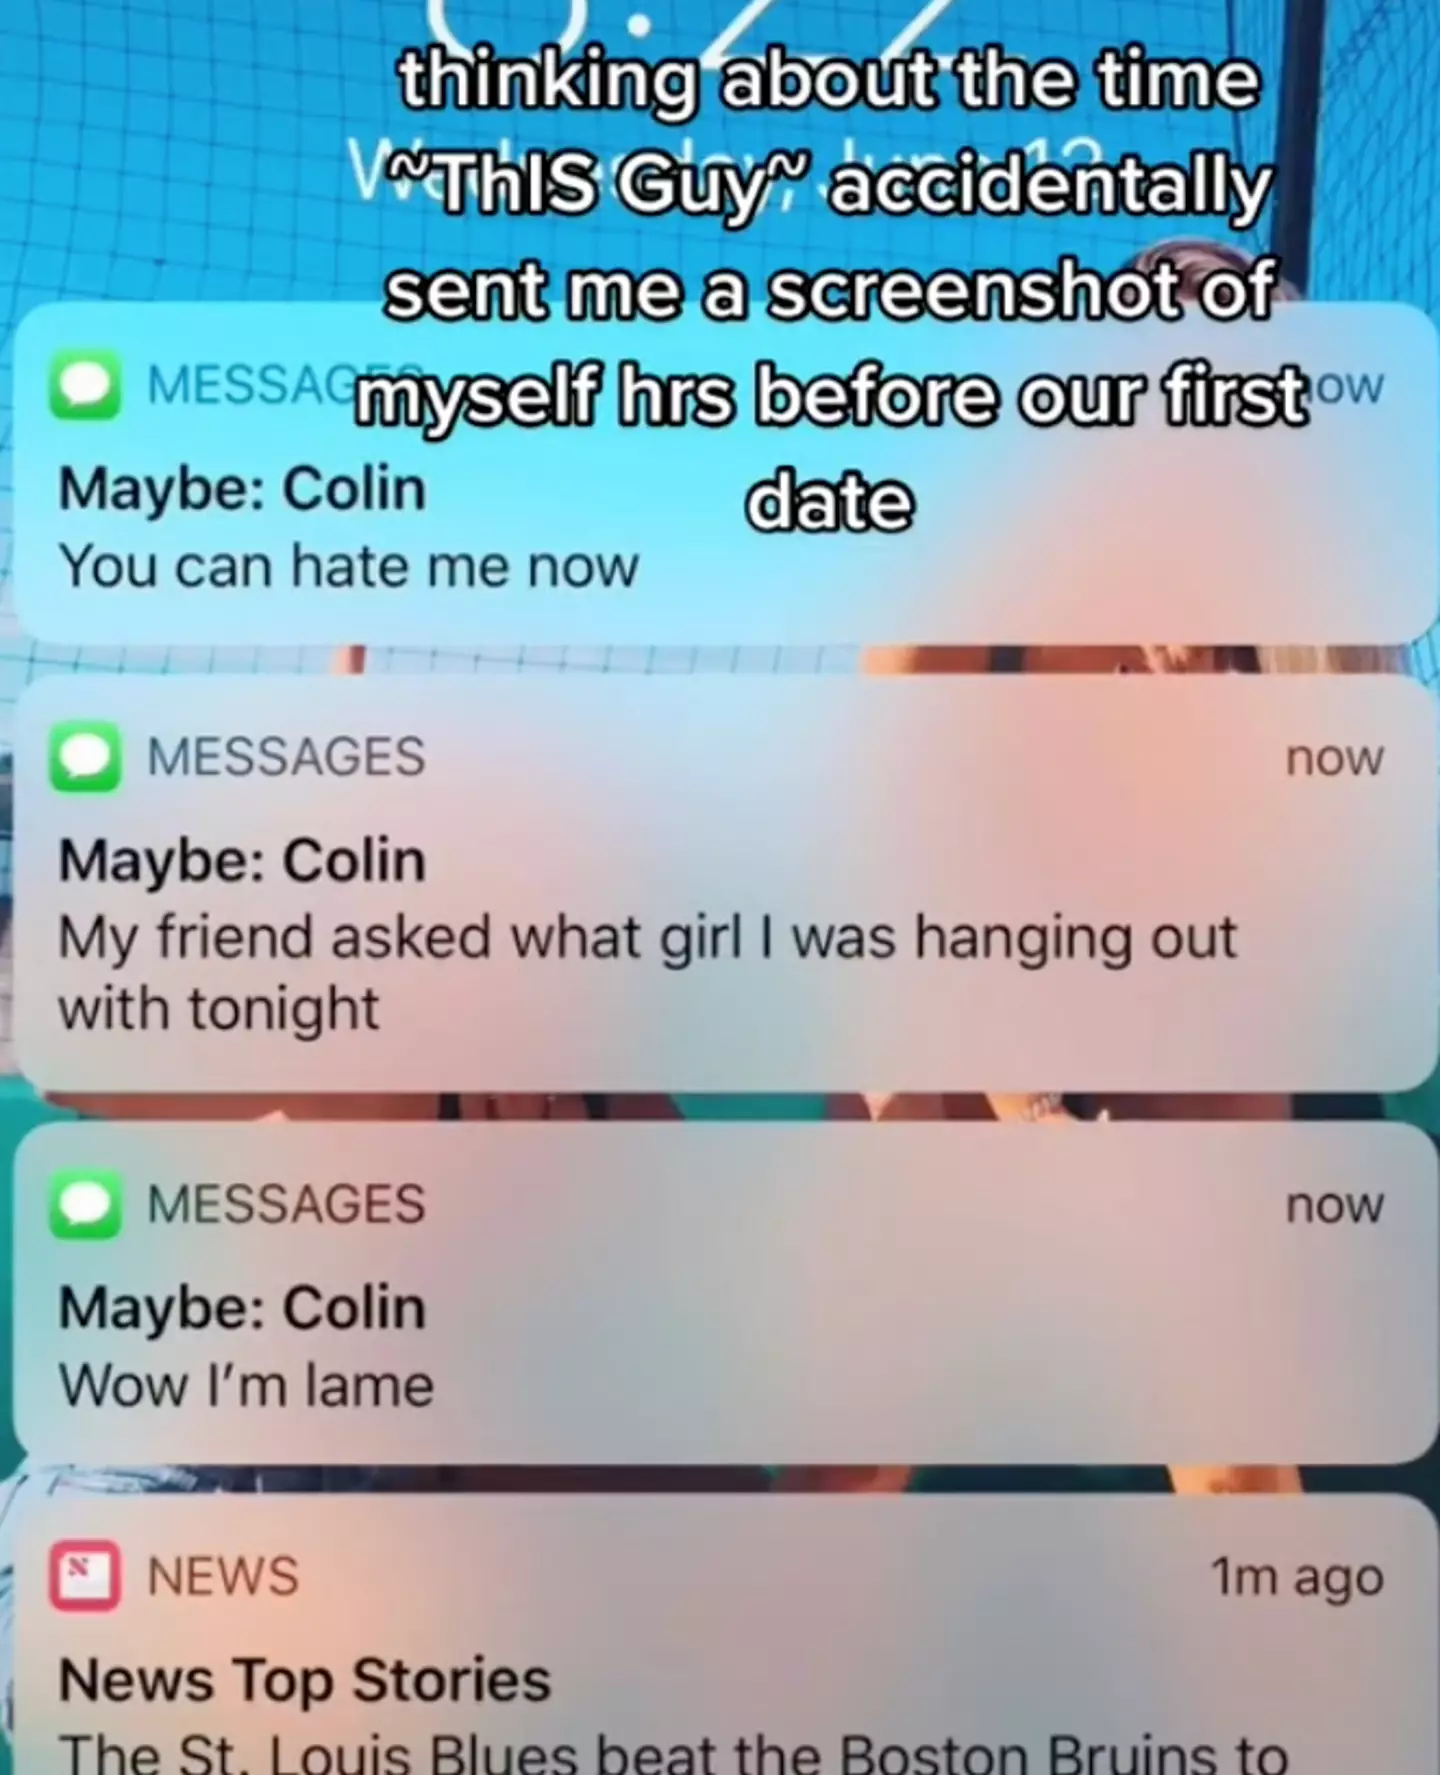 Colin ended his trilogy of texts with a defeated: "You can hate me now."